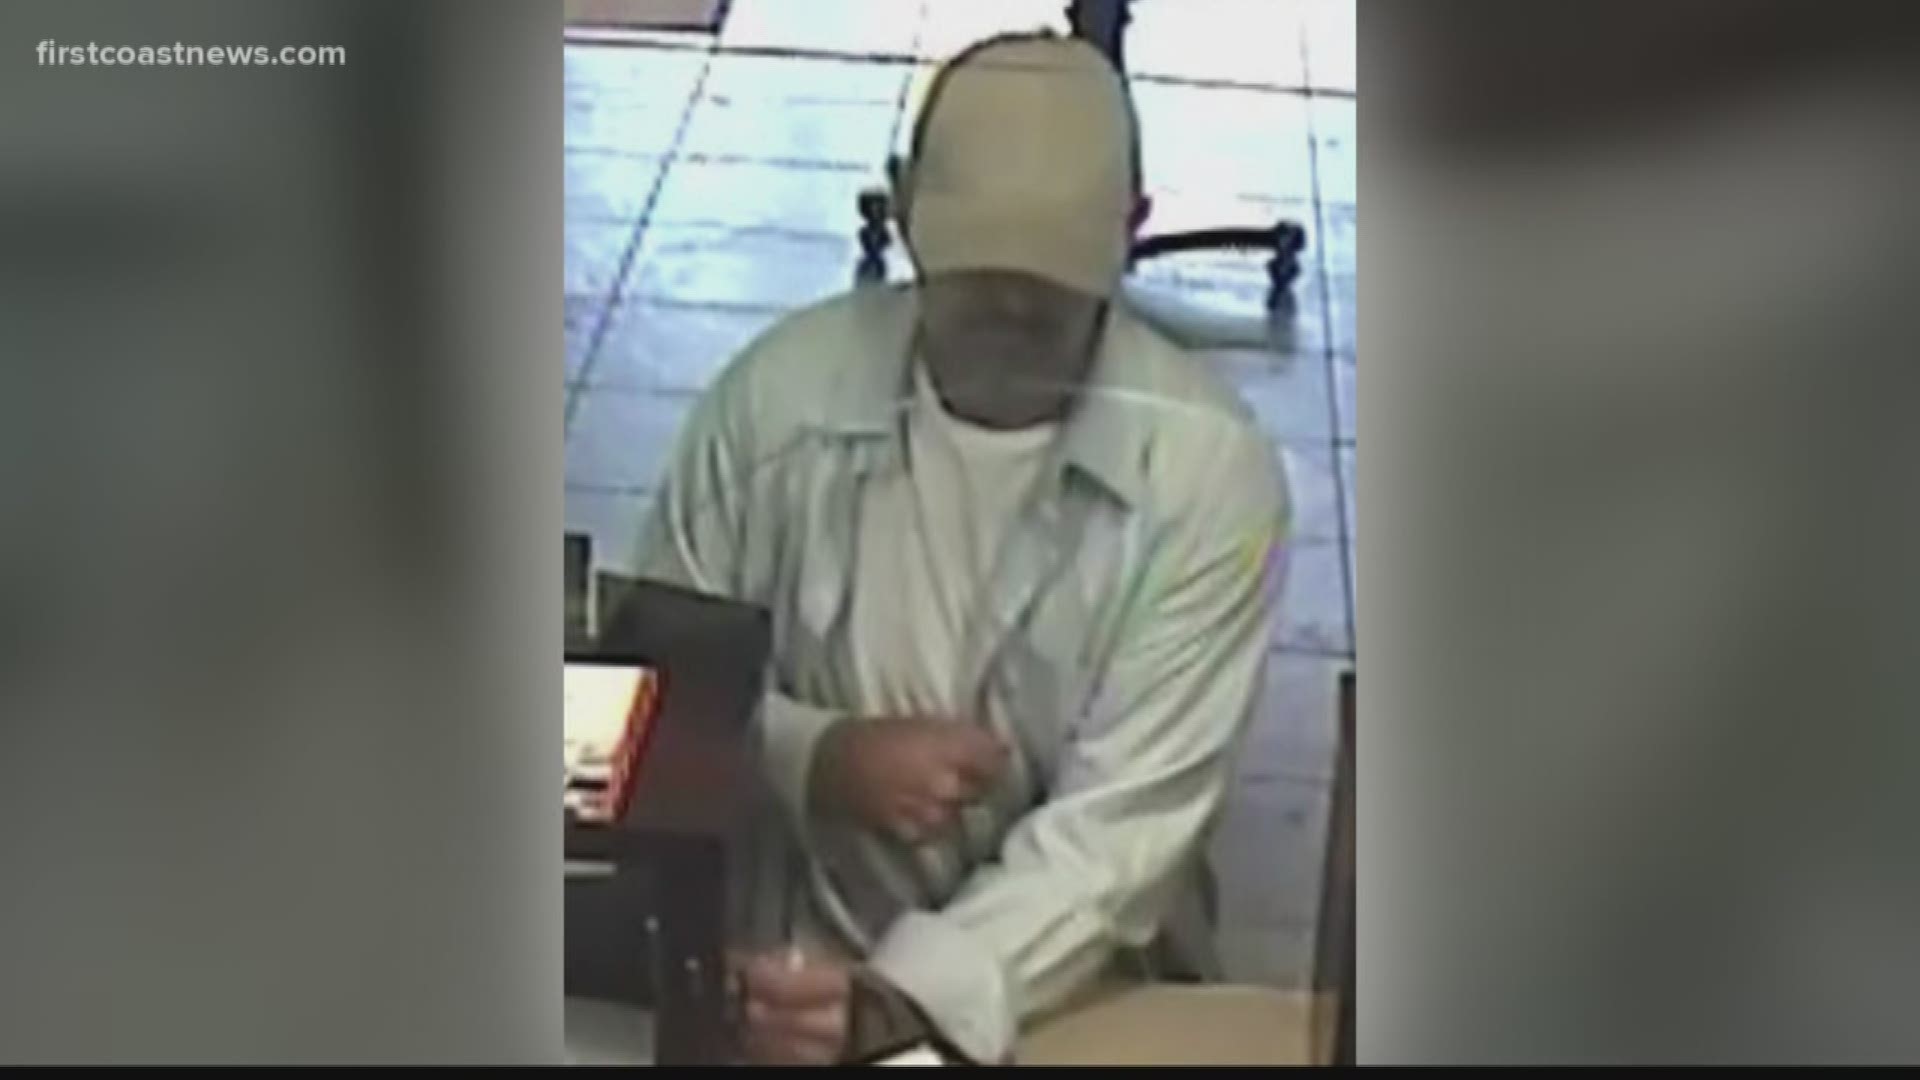 The Jacksonville Sheriff's Office is searching for a bank robbery suspect and has released surveillance photos in hopes the public will be able to help identify him.